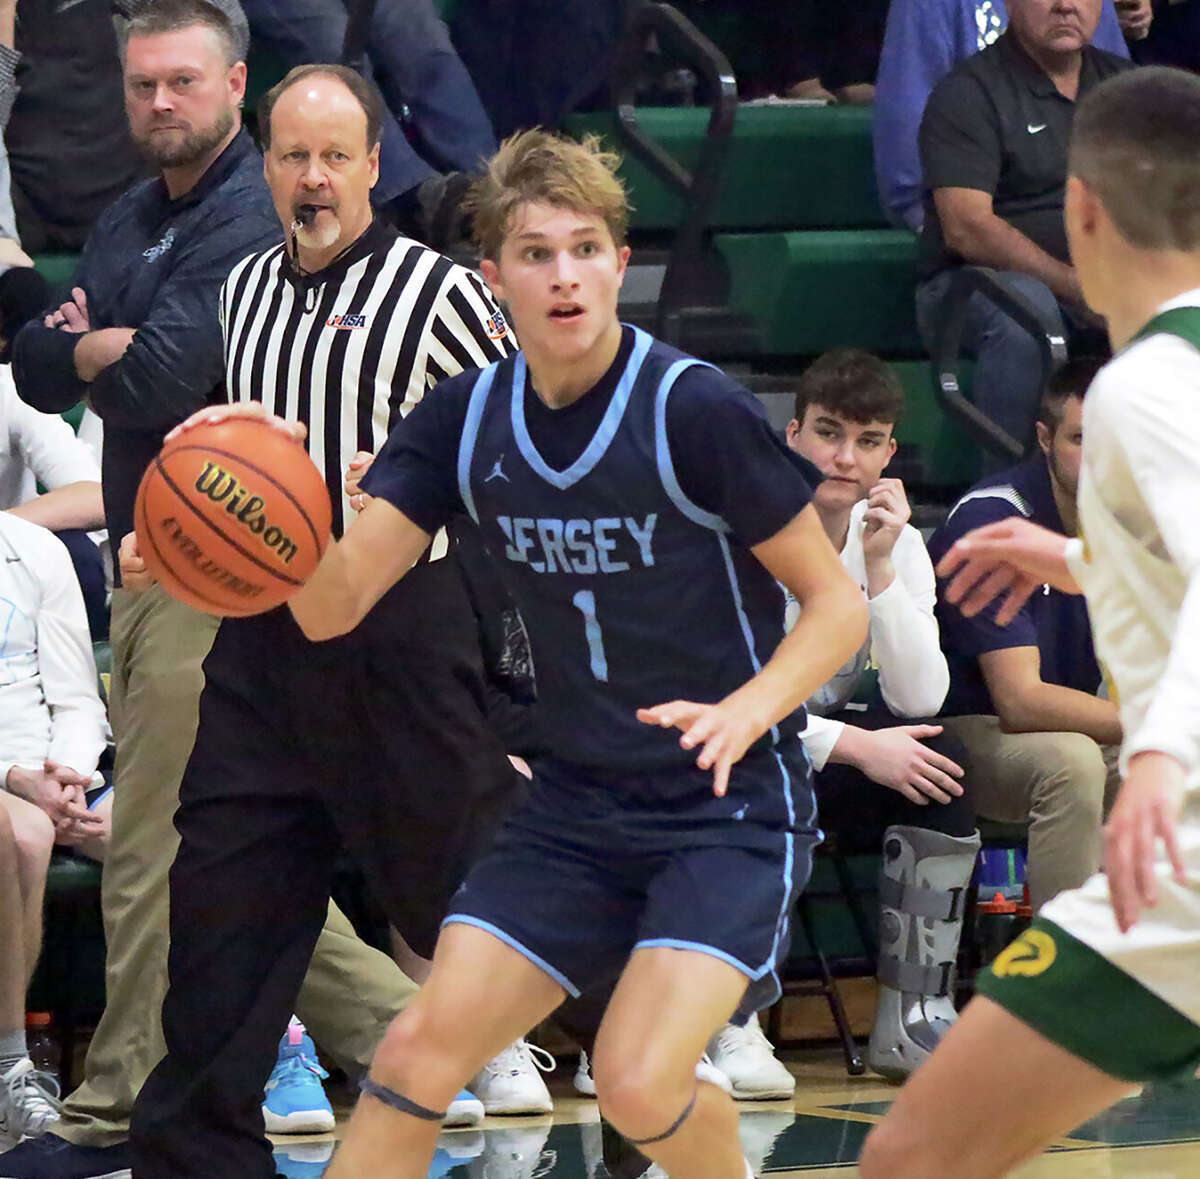 Jersey's Francis Vogel controls the ball Tuesday night against Metro-East Lutheran.